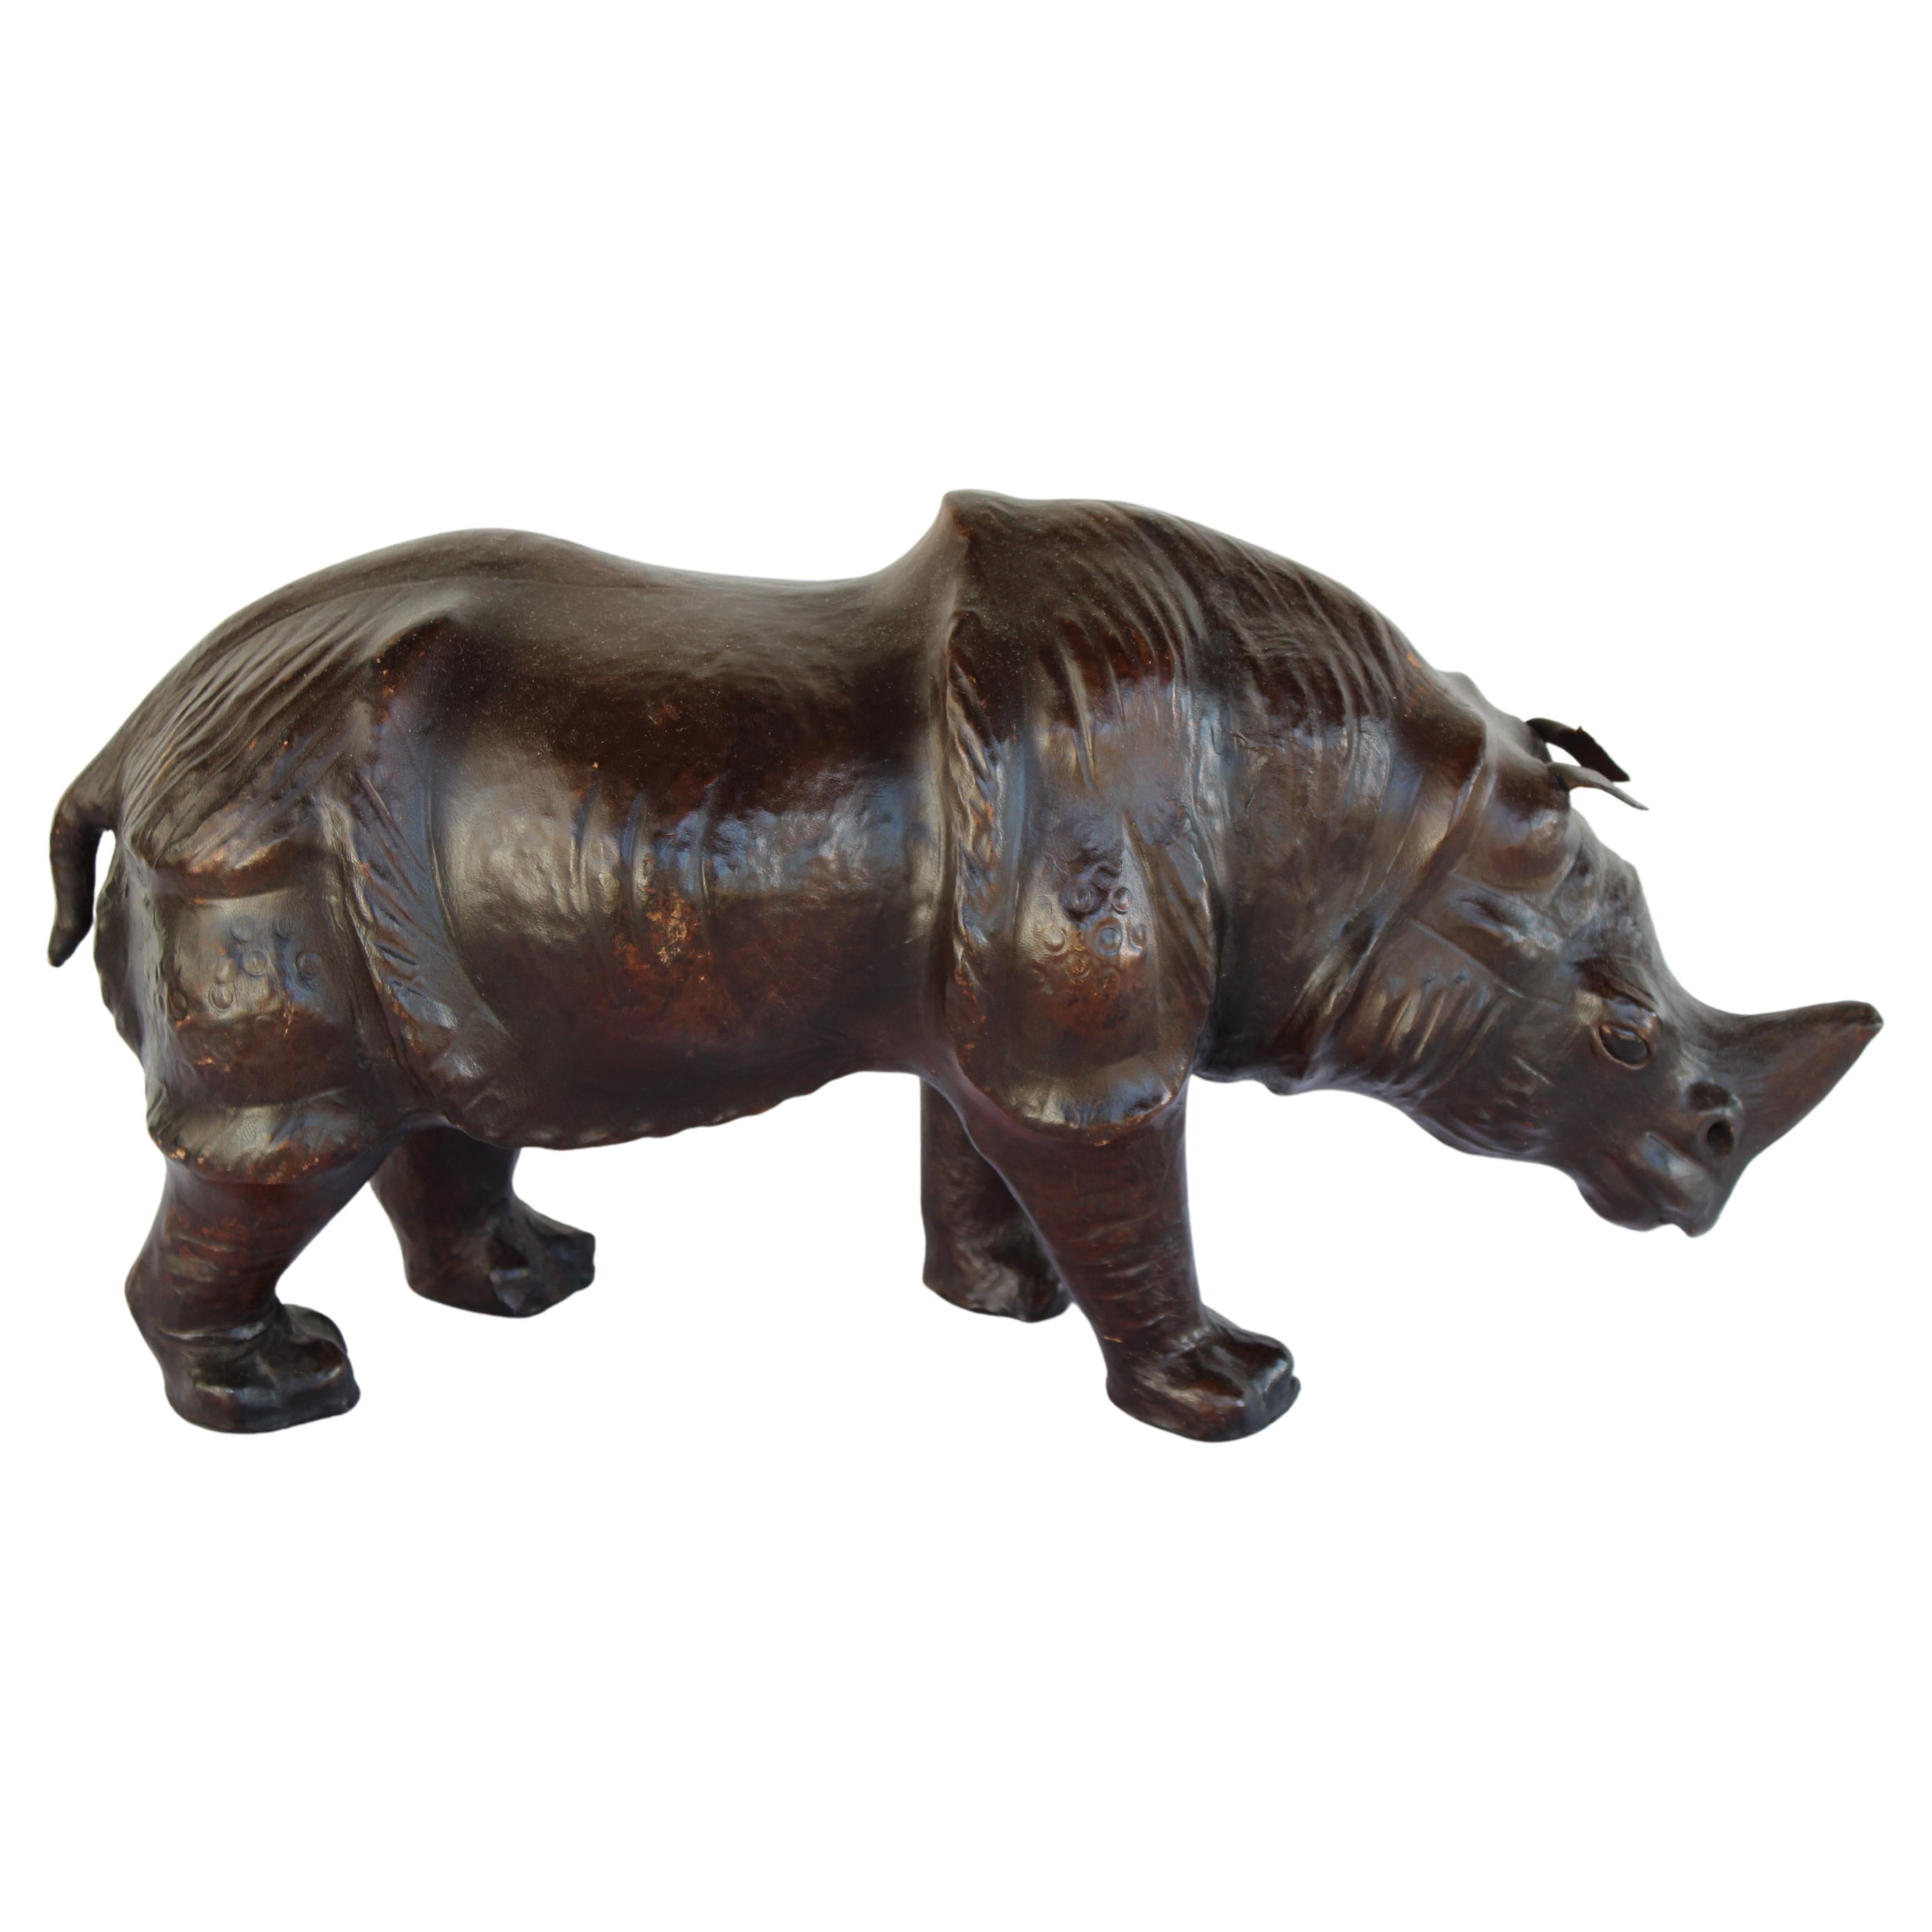 Leather Rhinoceros Attributed to Dimitri Omersa (smaller version)